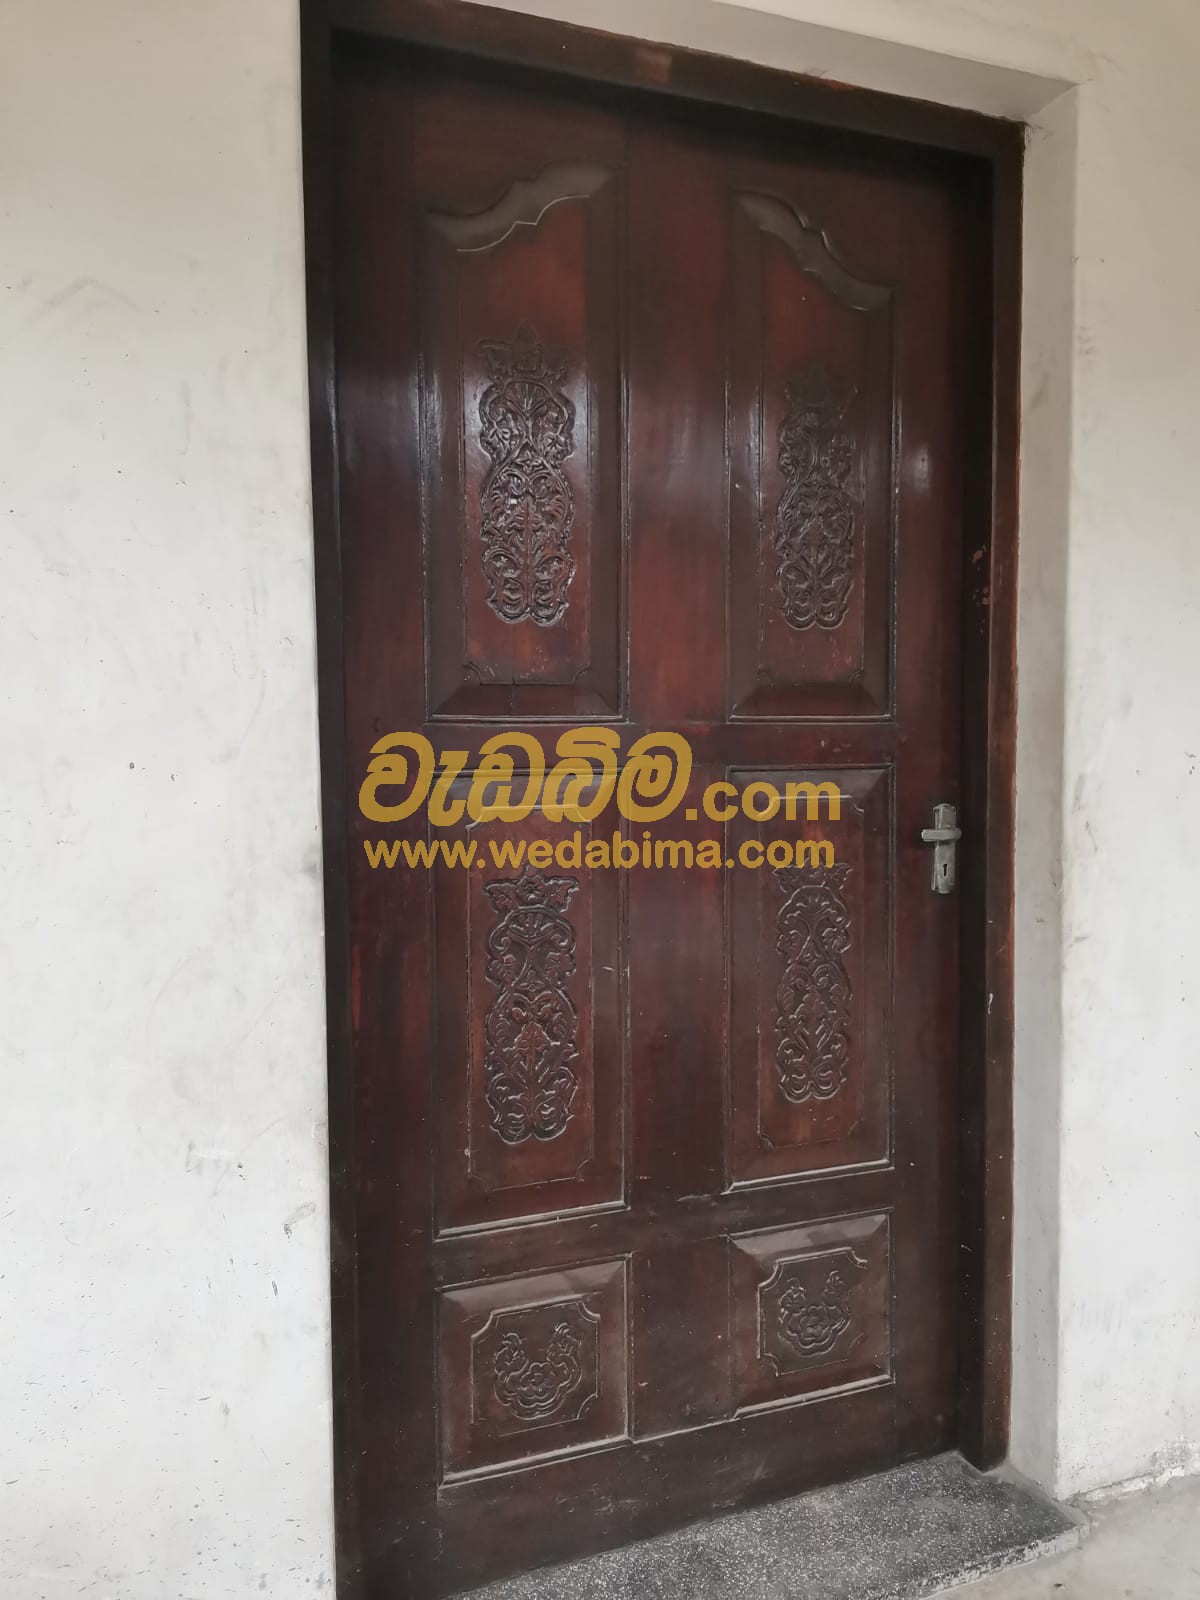 Cover image for Milla Wood Doors and Door frames for Sale in Wattala